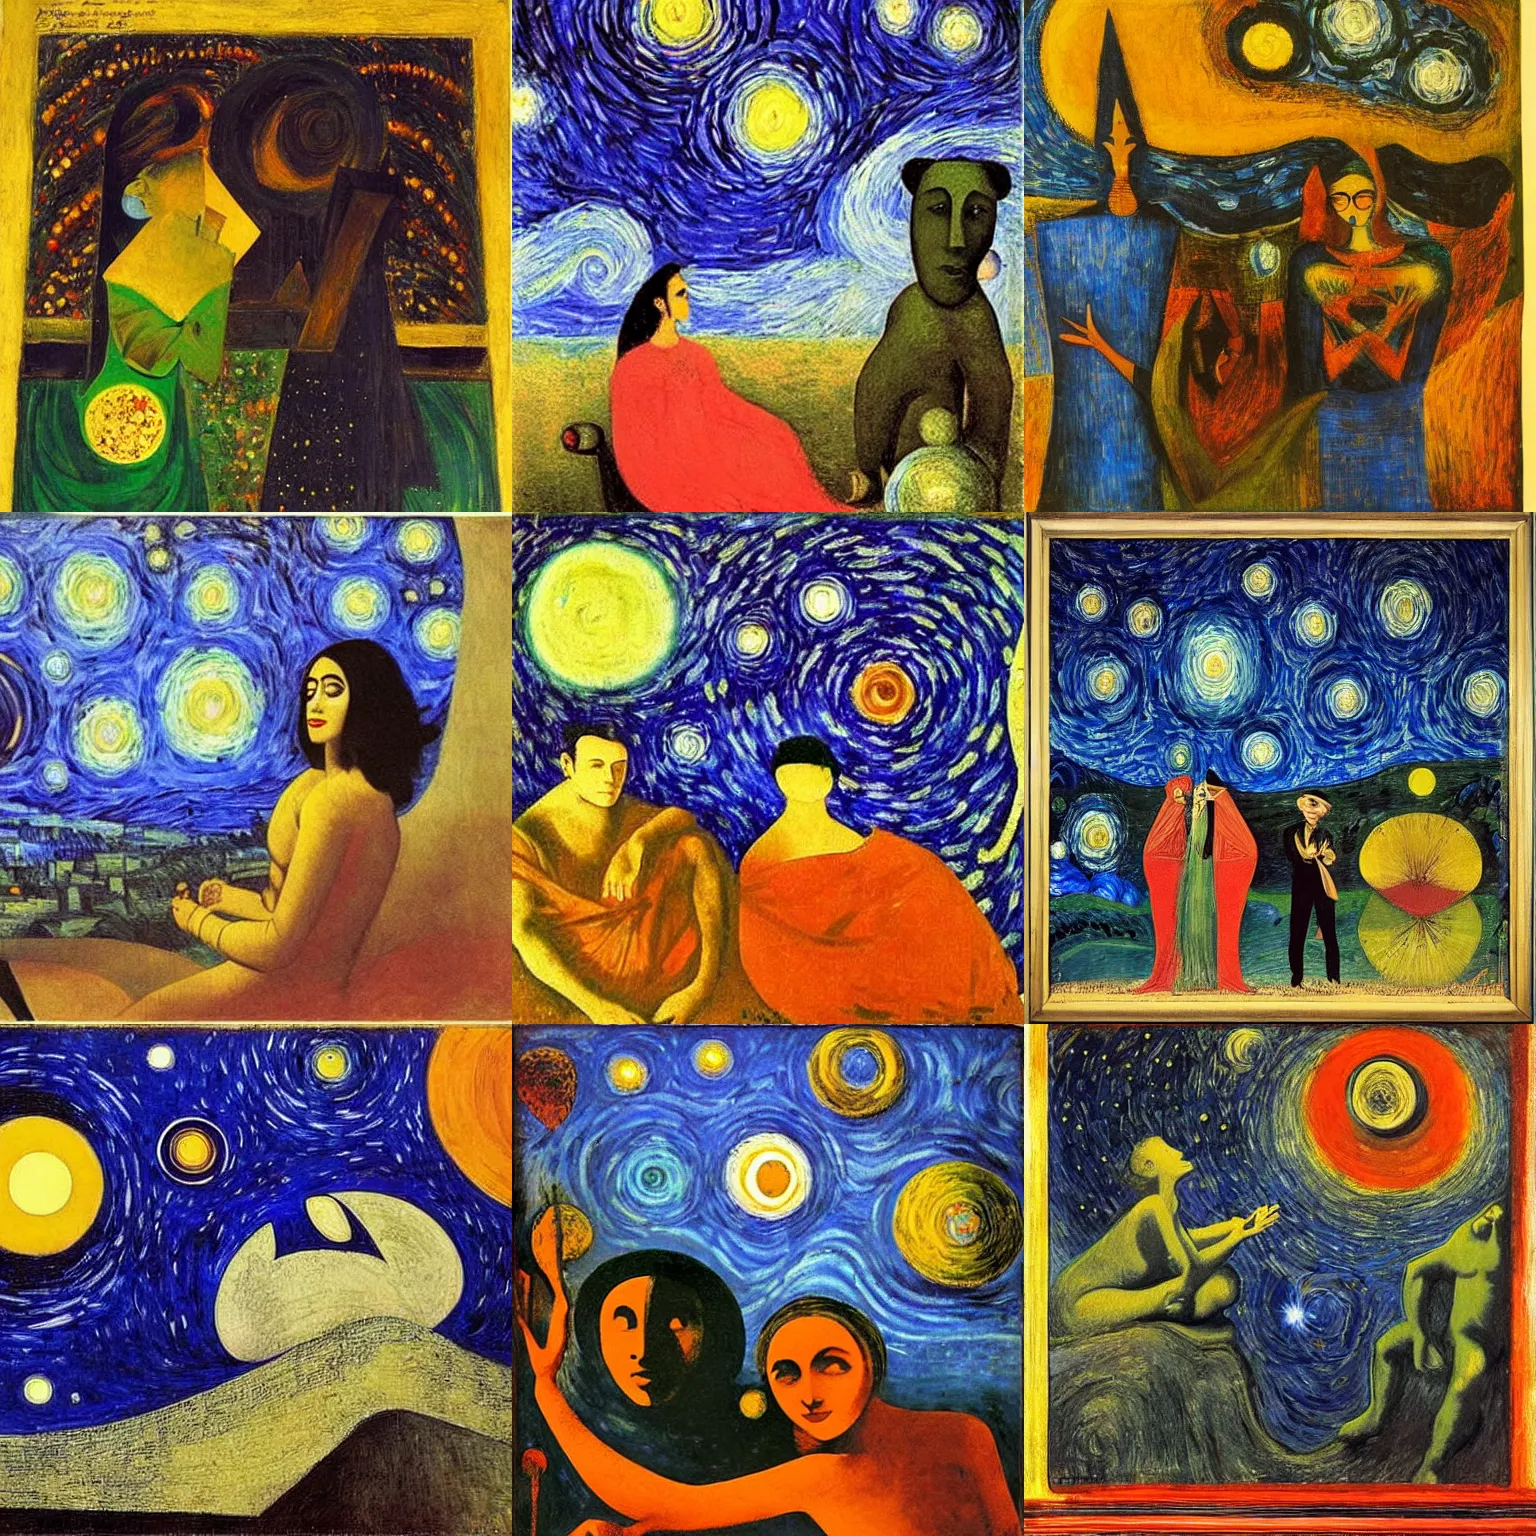 Prompt: The Starry Night by Max Ernst and Amrita Sher-Gil